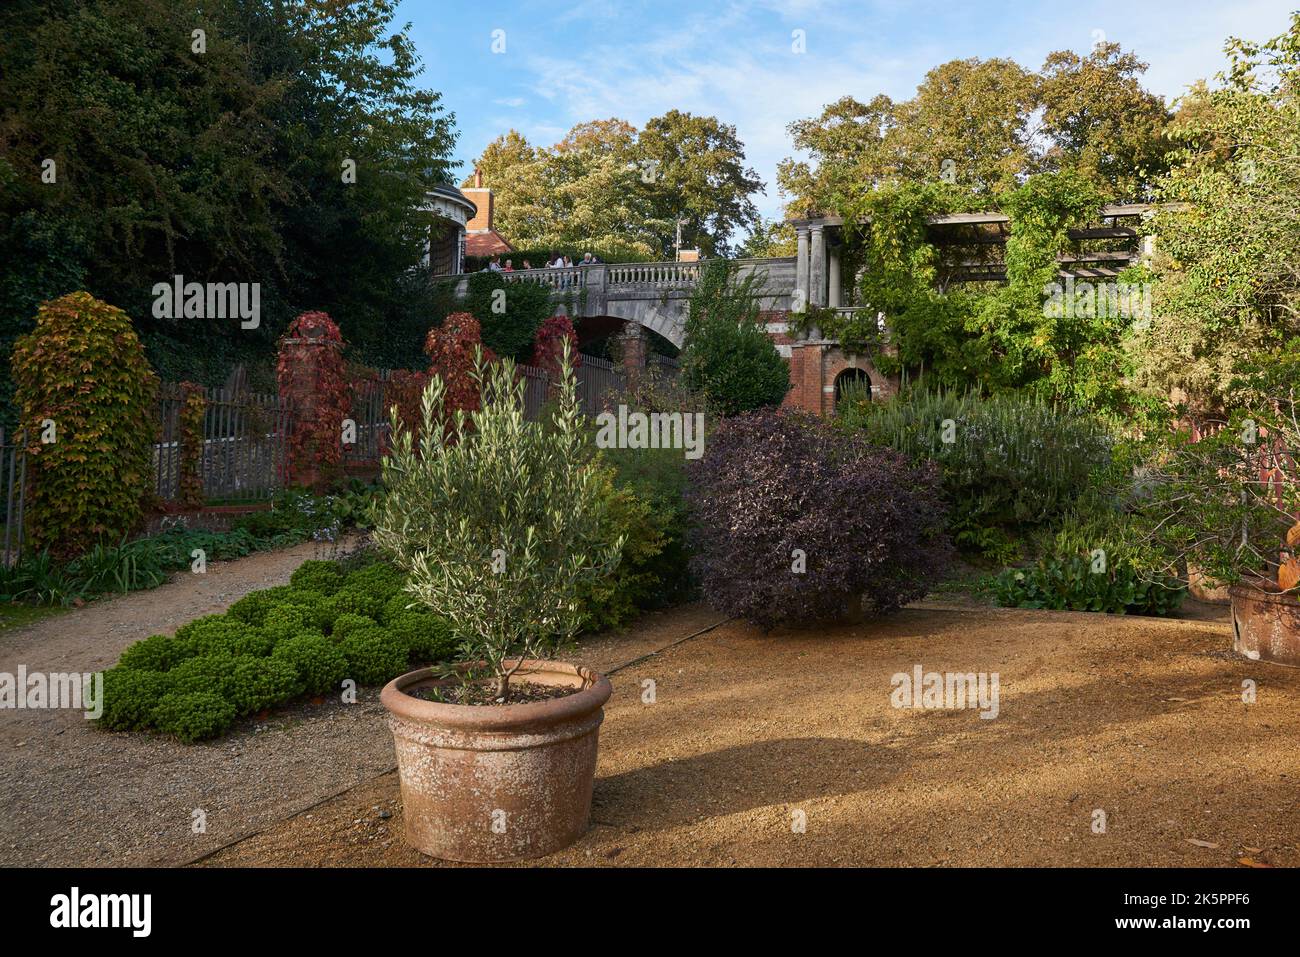 Shrubs and flower beds at the Hill Garden on Hampstead Heath, North London UK, in October Stock Photo